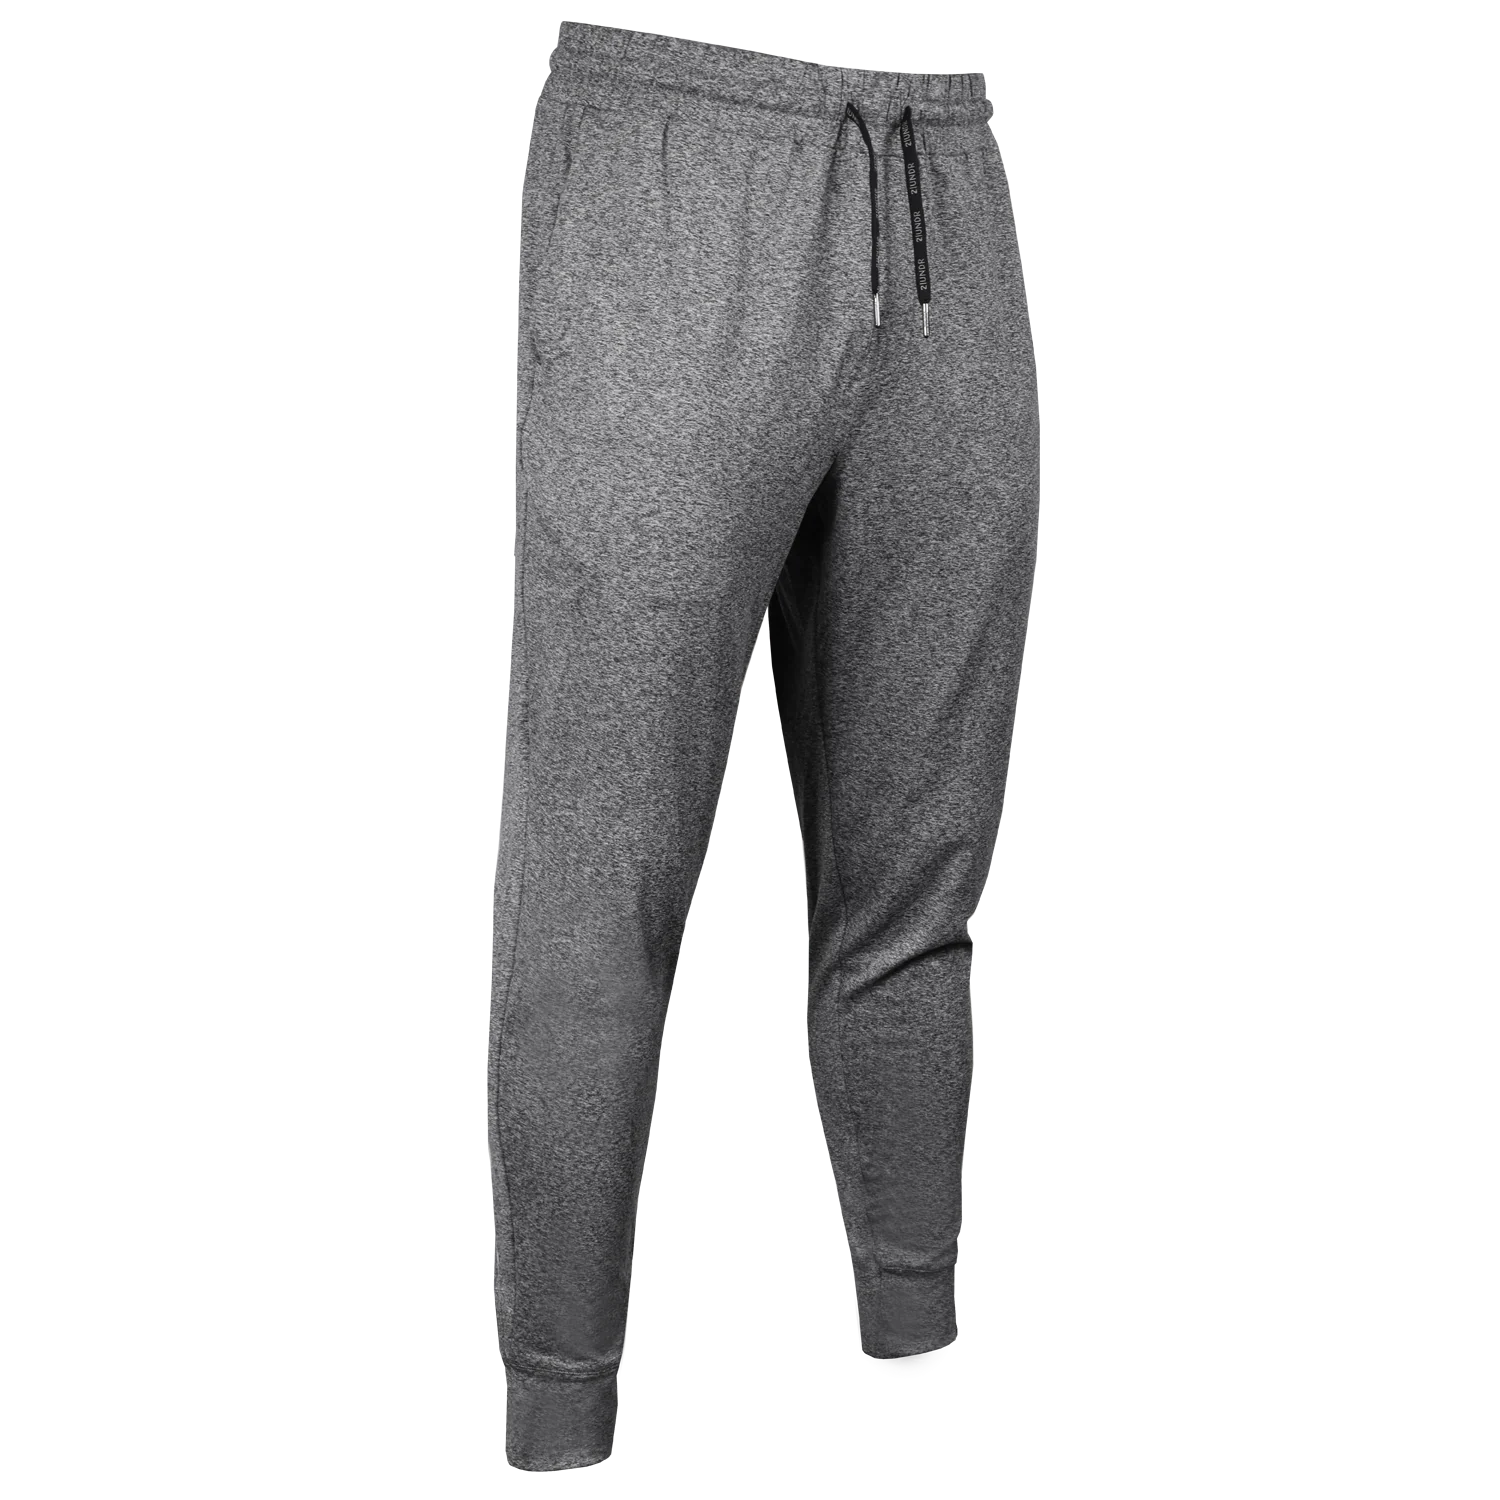 2Undr - Game Time Jogger : Static Grey